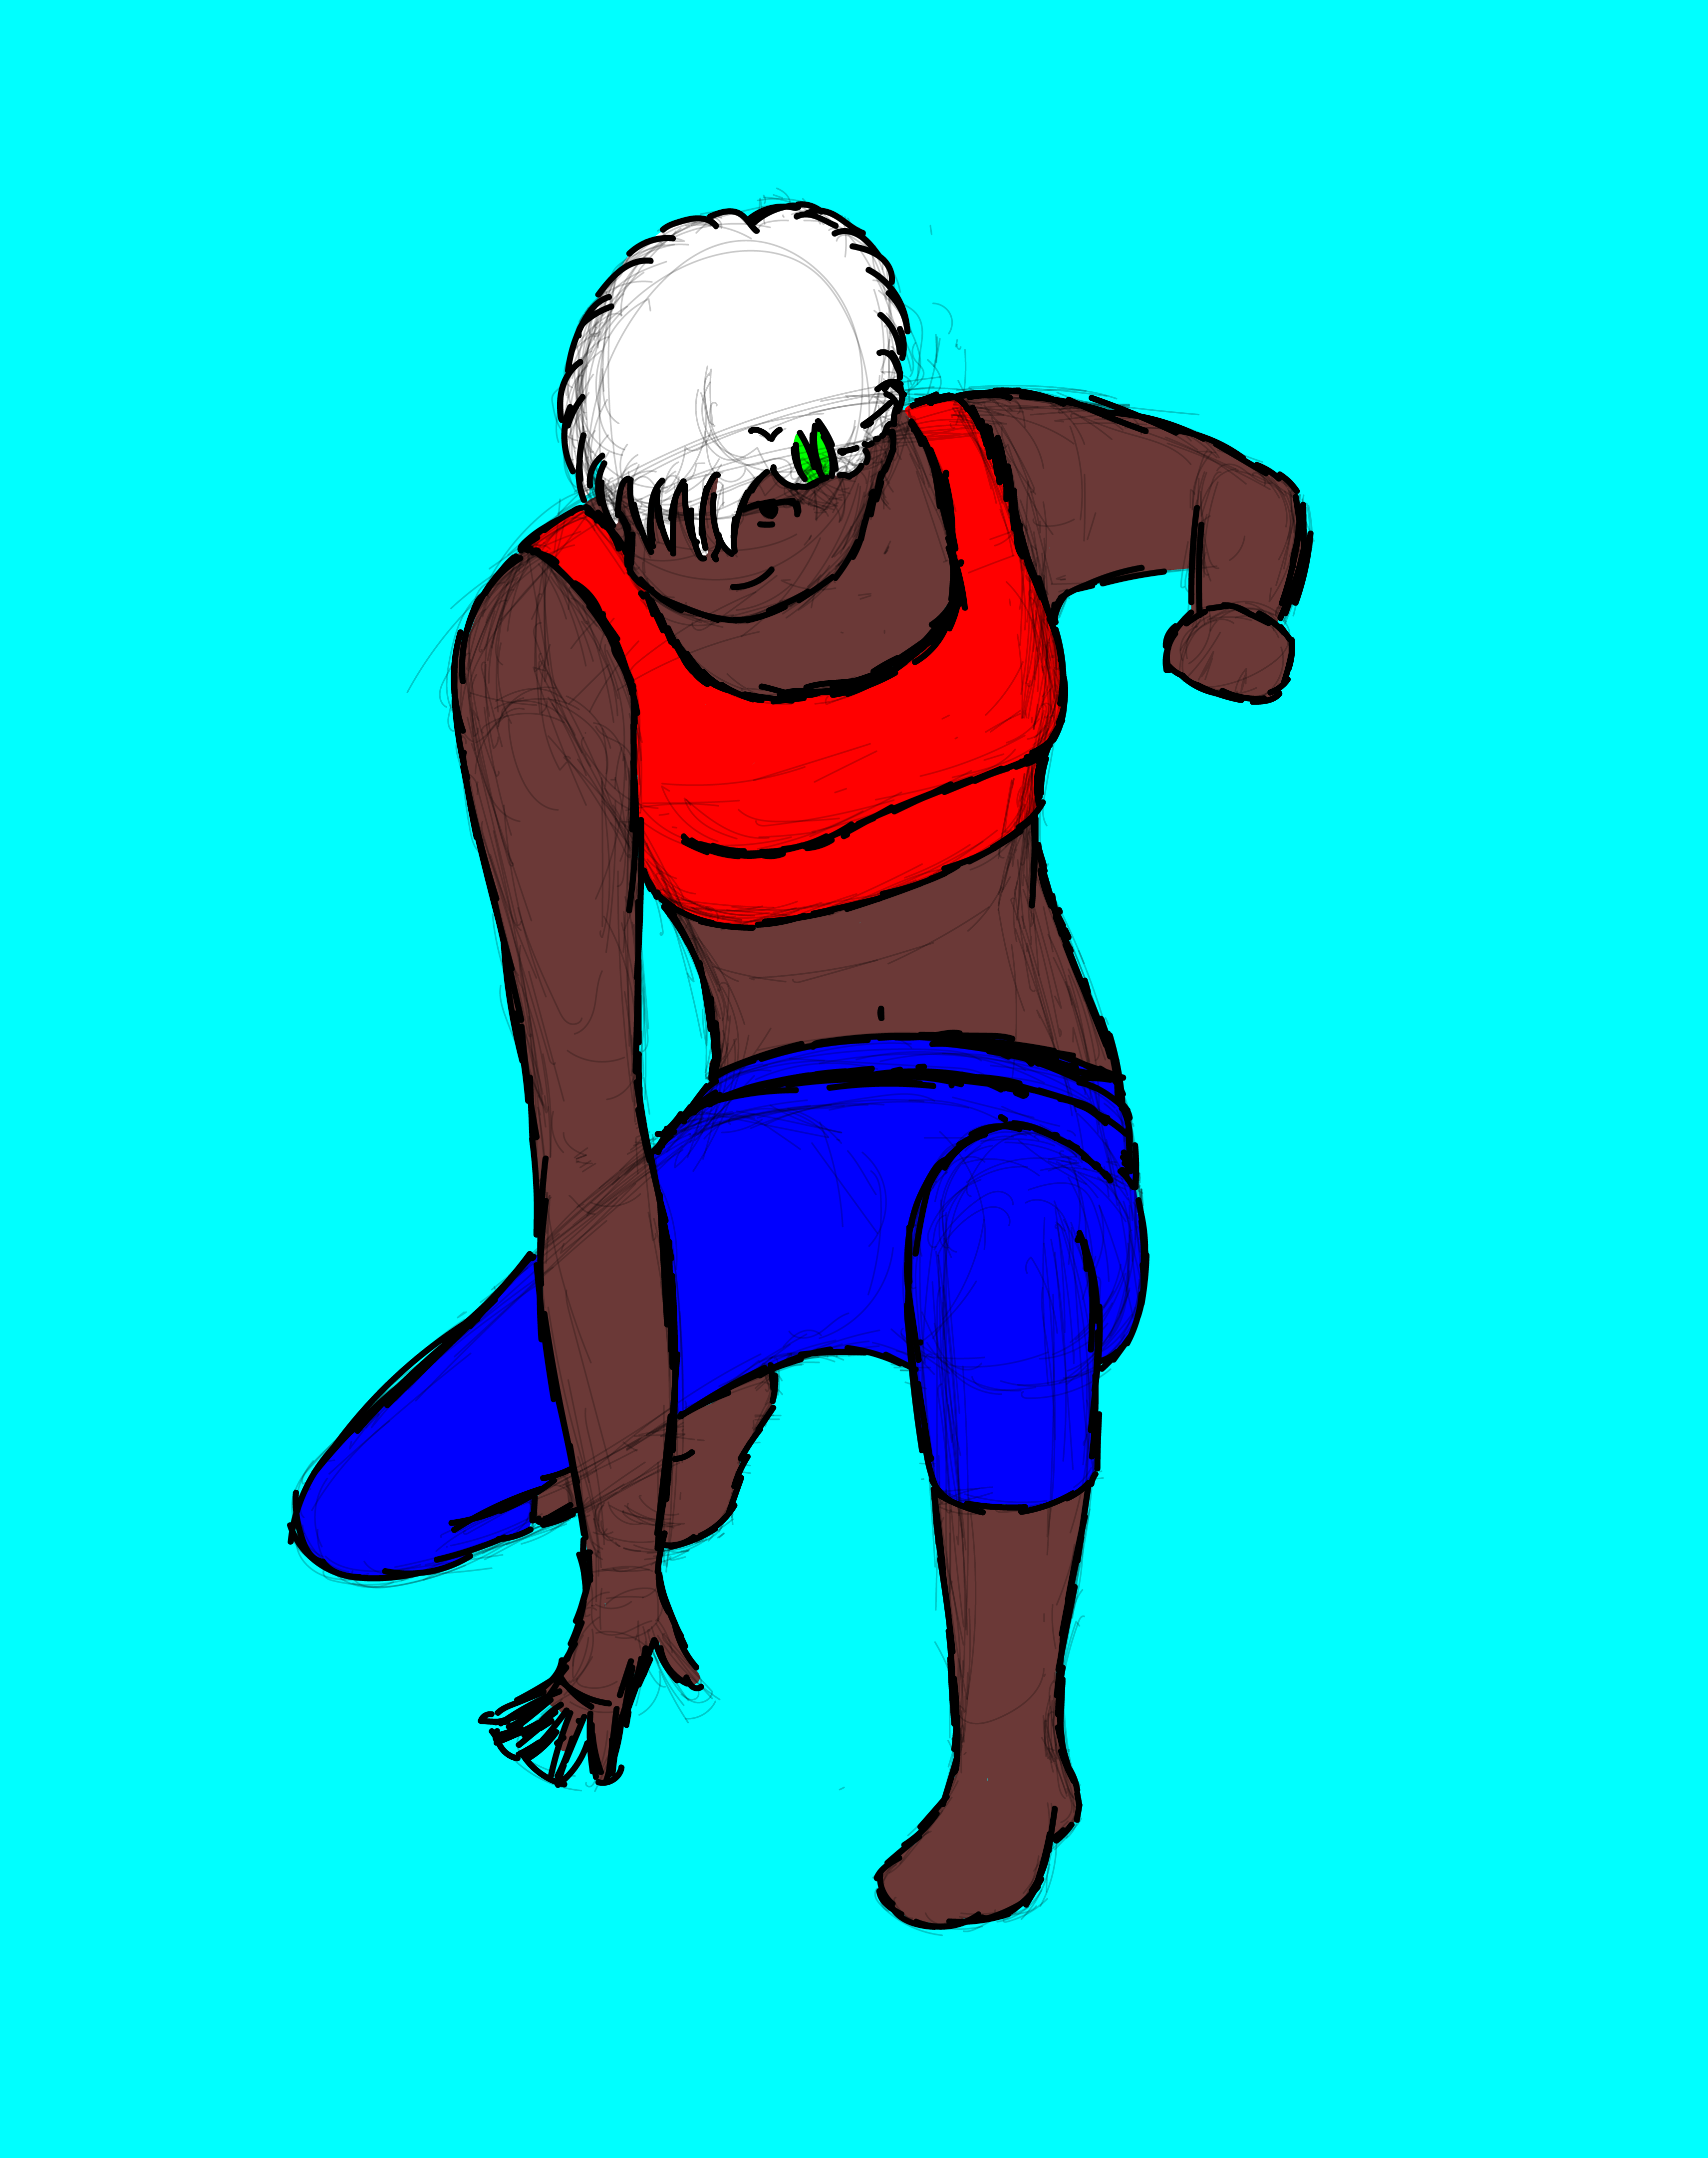 a girl with white hair and neon workout clothes crouches in an action pose